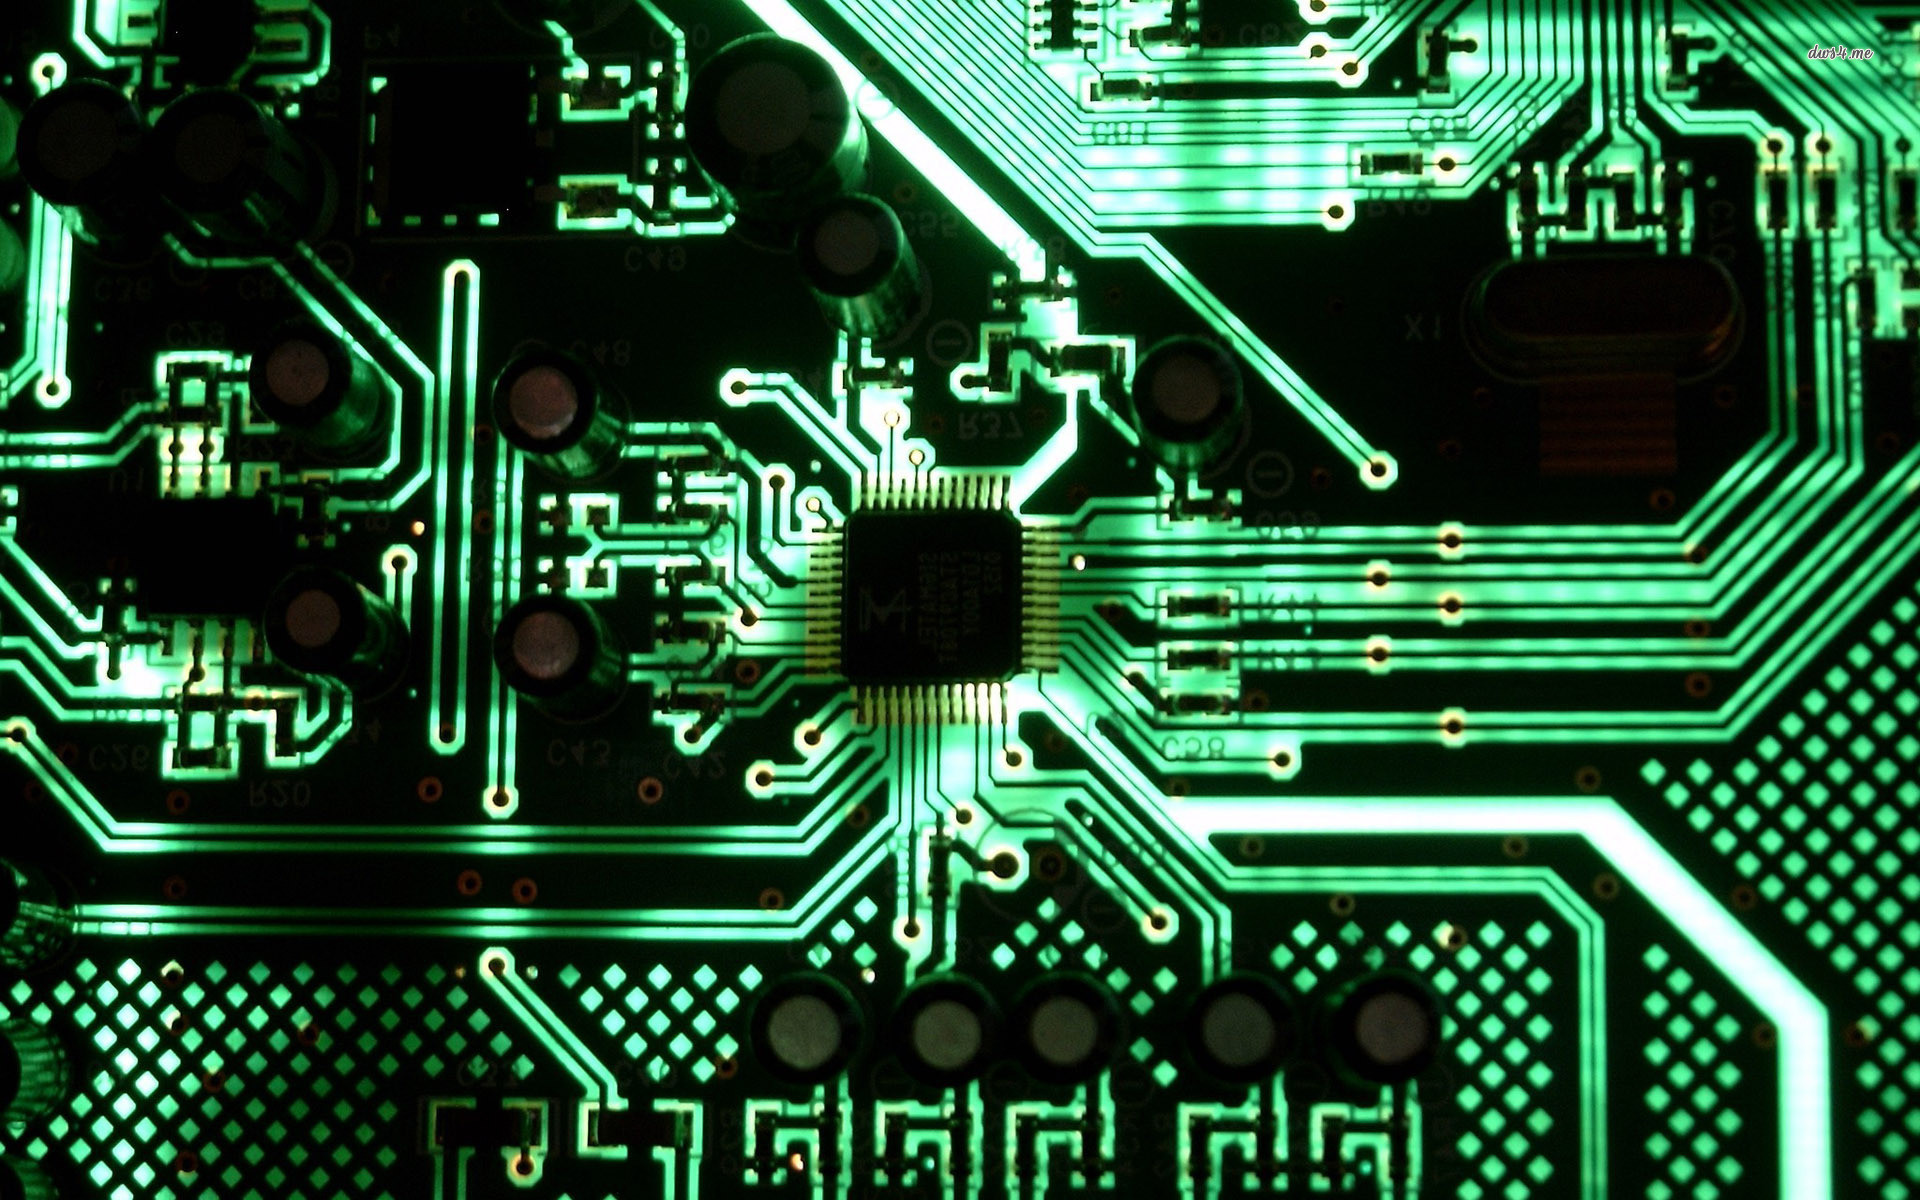 1920x1200 11 best Computer images on Pinterest | Computer repair, Electronic circuit  and Futuristic design